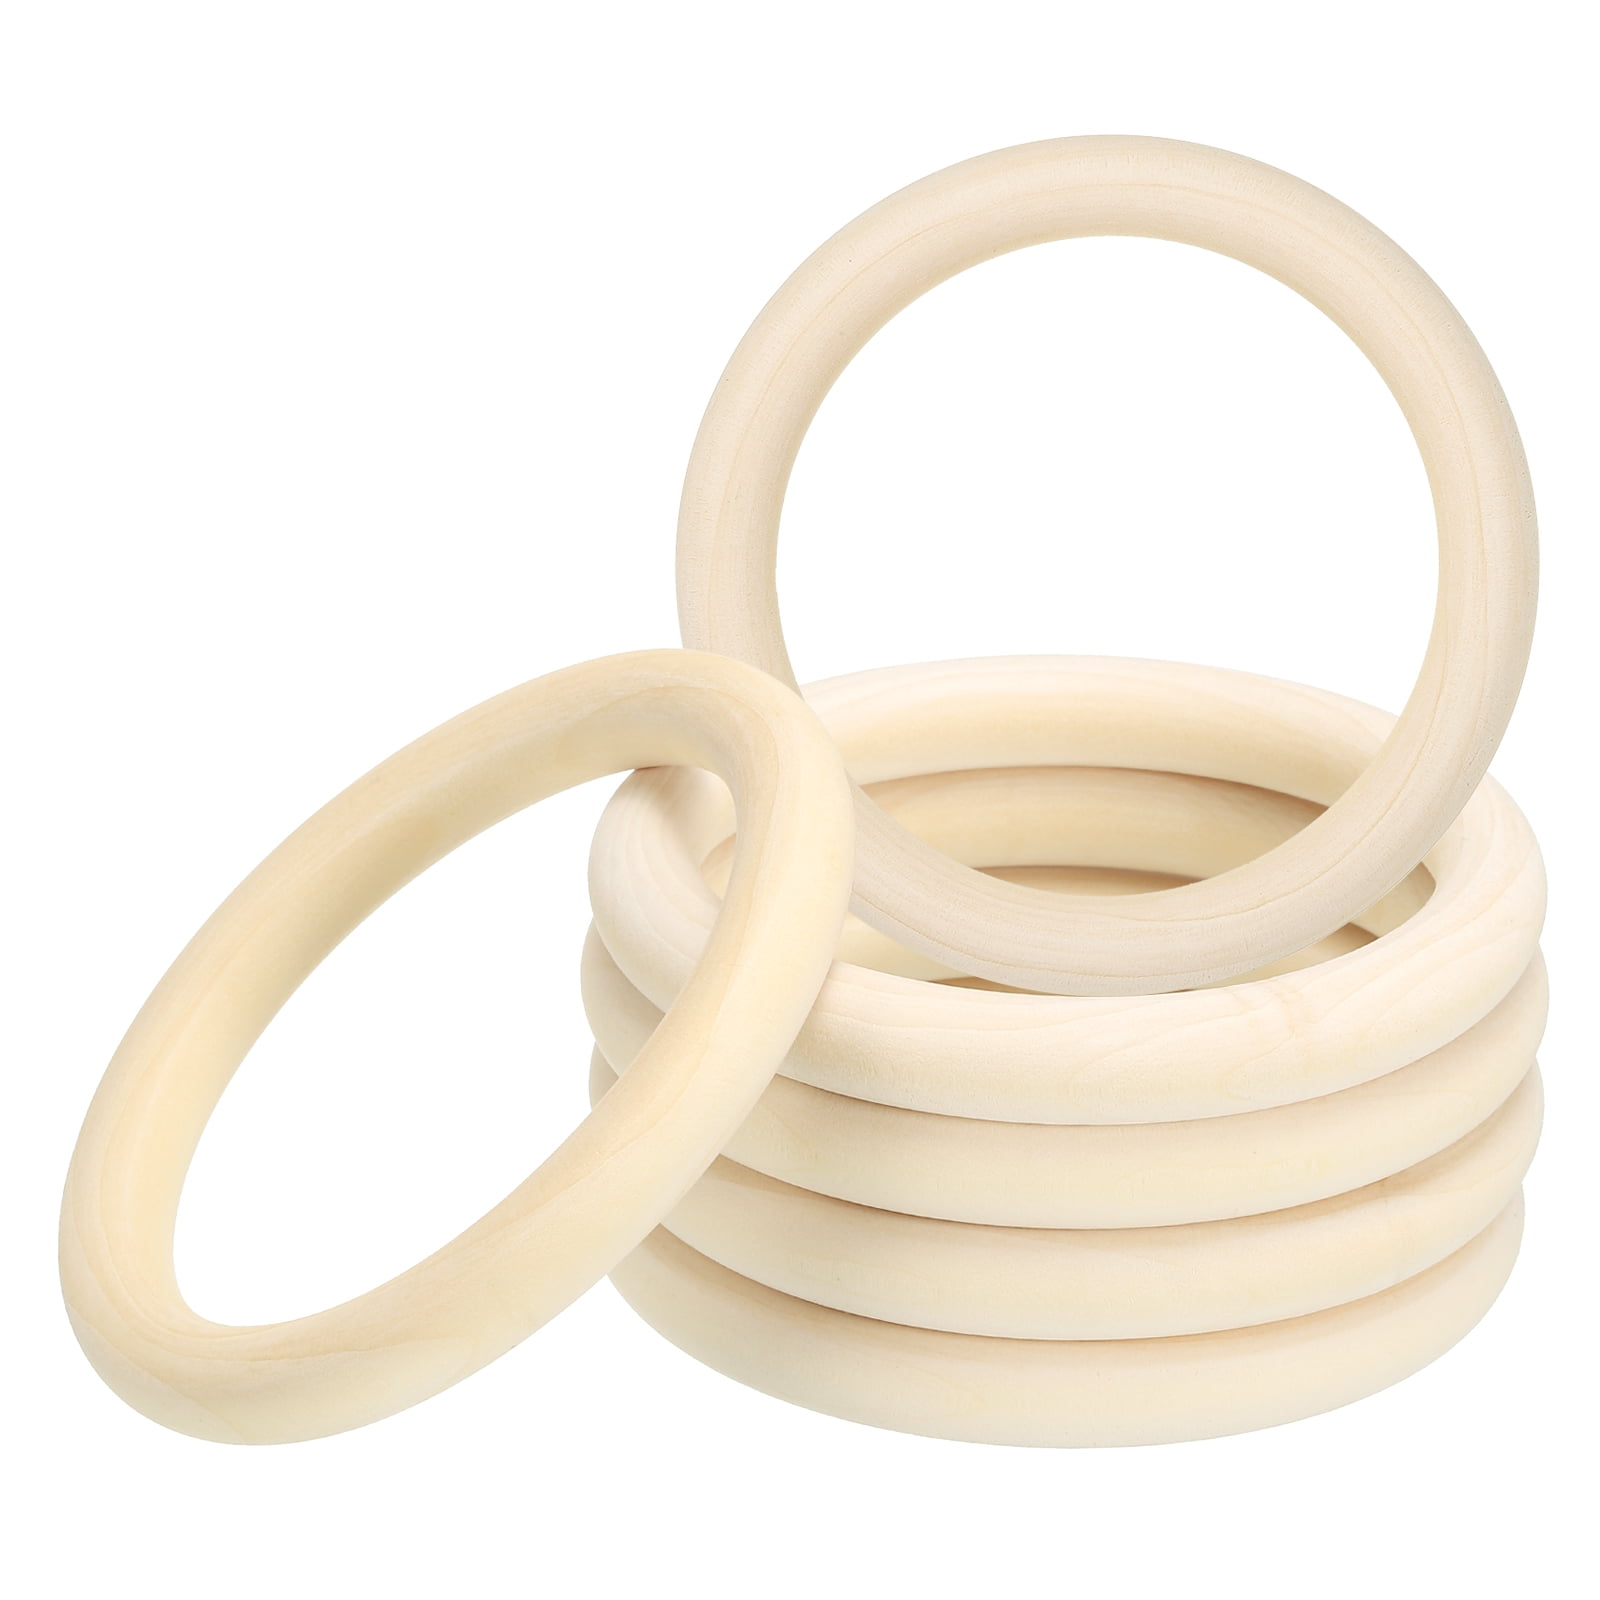 20mm WOODEN RINGS 0.79 Inch Craft Wood Ring Large 10mm Hole 